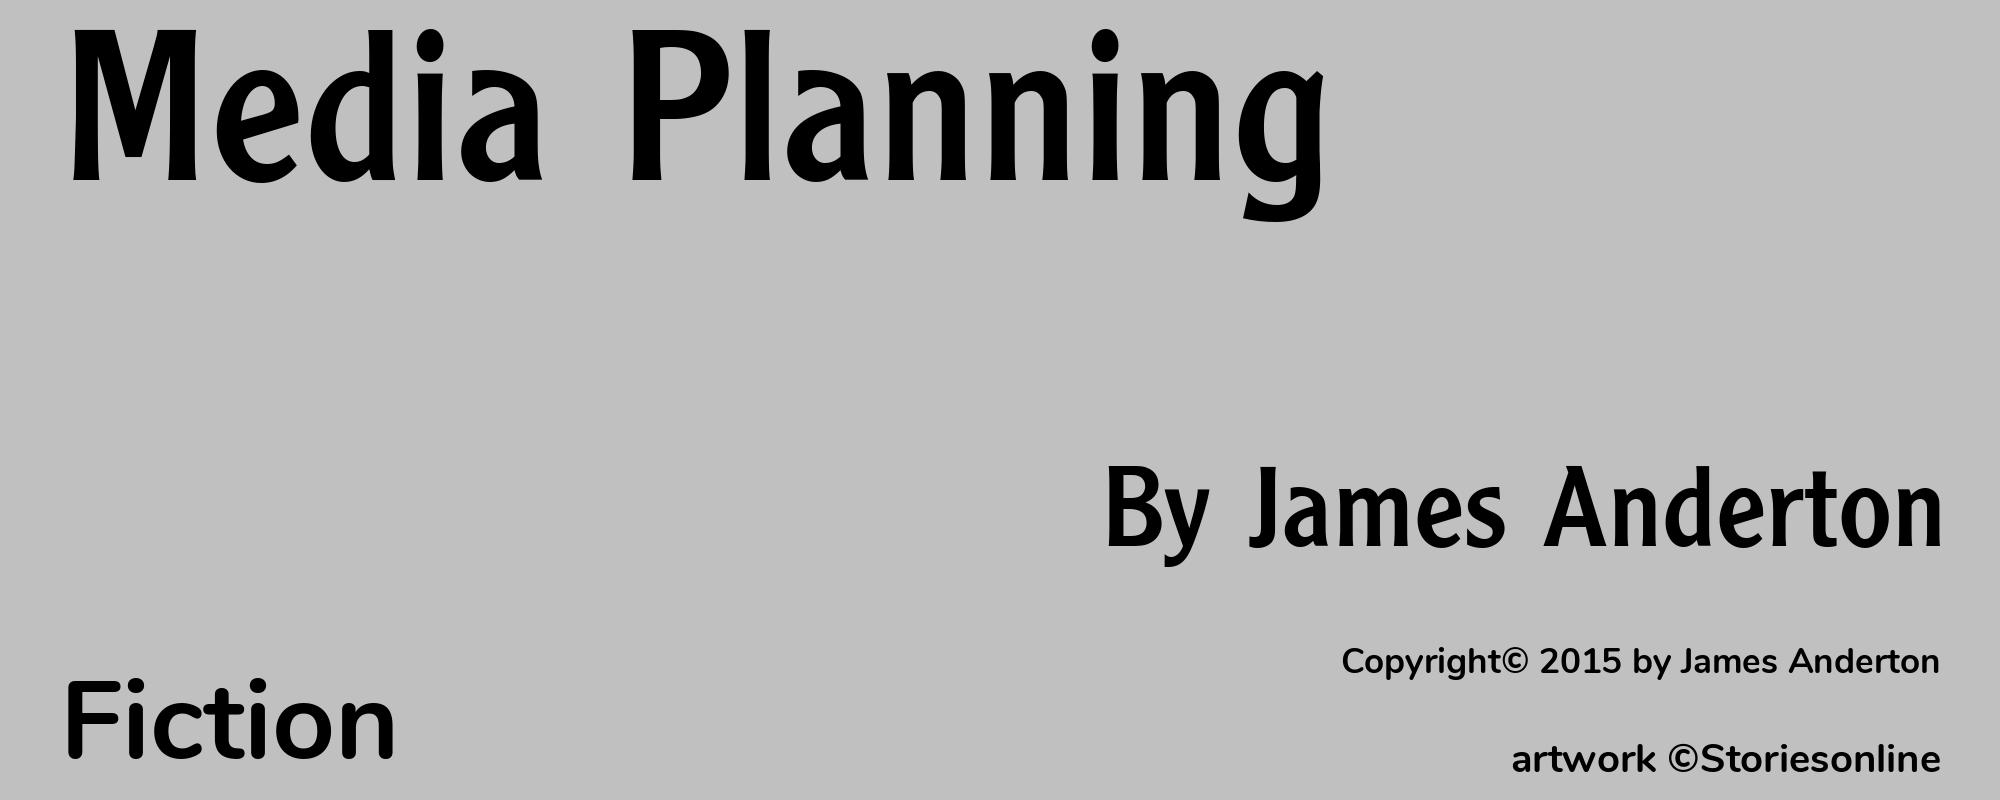 Media Planning - Cover